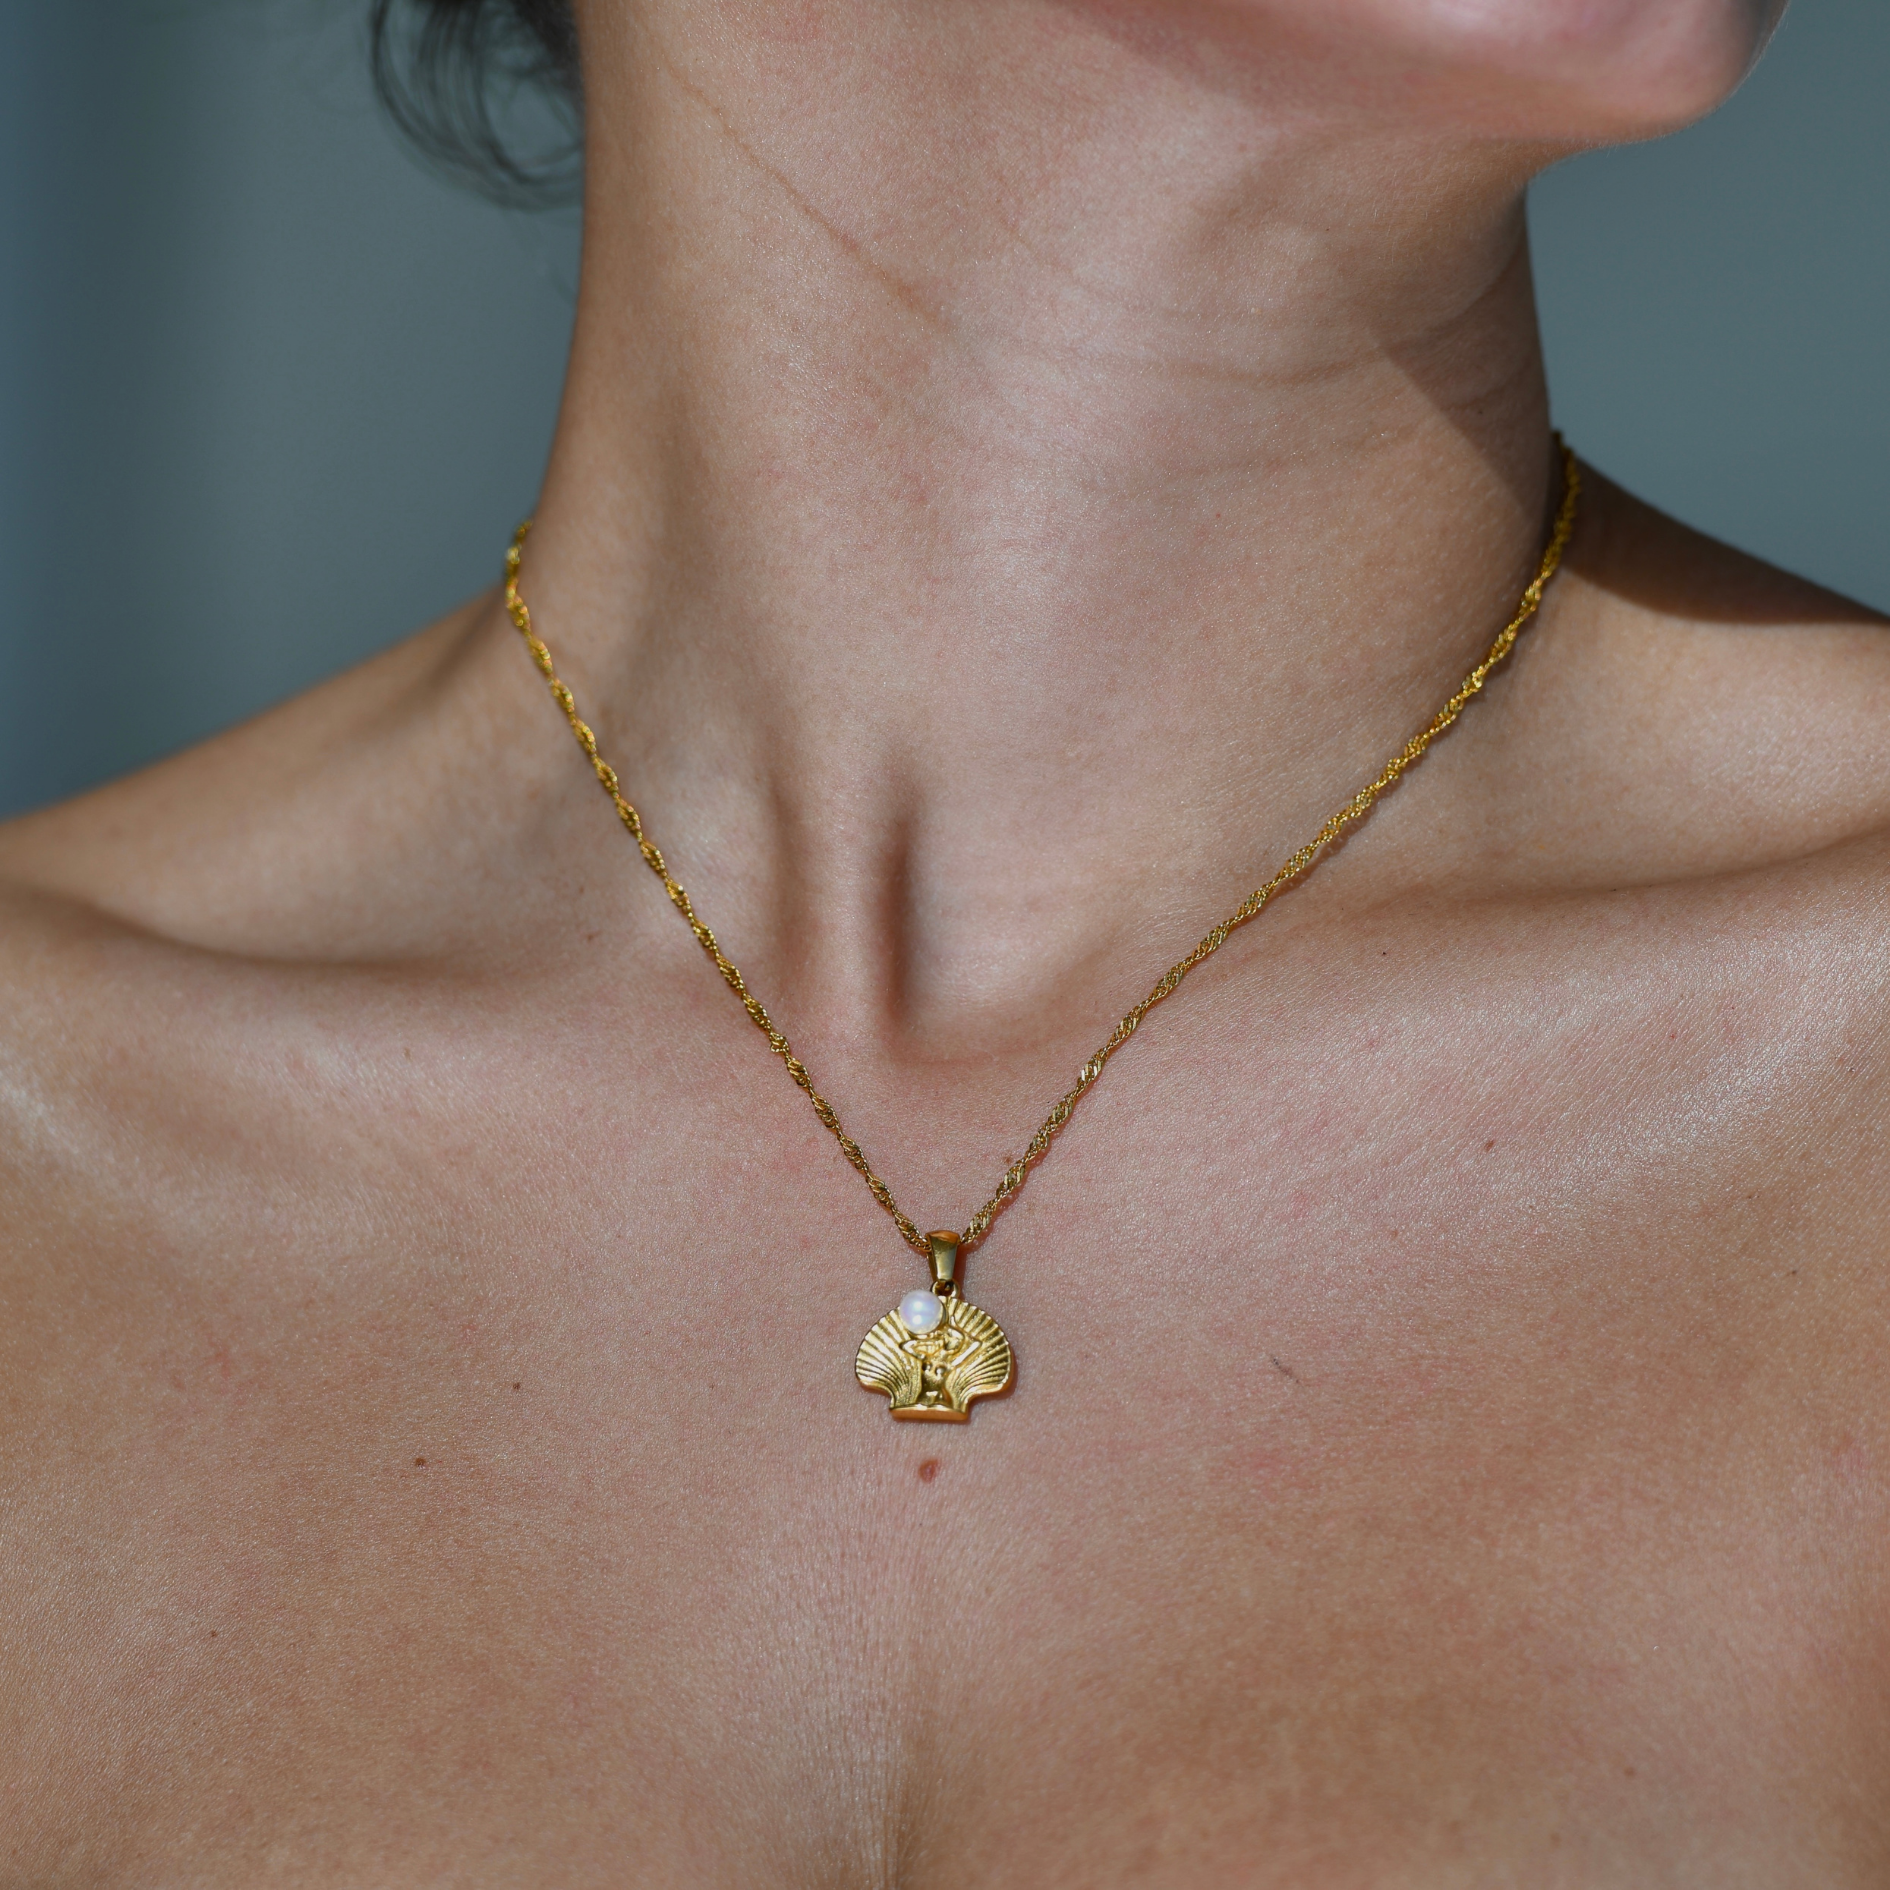 Open Shell Shape pendant with a woman silohuette in the middle holdin a white pearl on her shoulders. Resembling "the birth of venus" Gold plated chain and pendant necklace. Venus shell pendnat gold necklace.